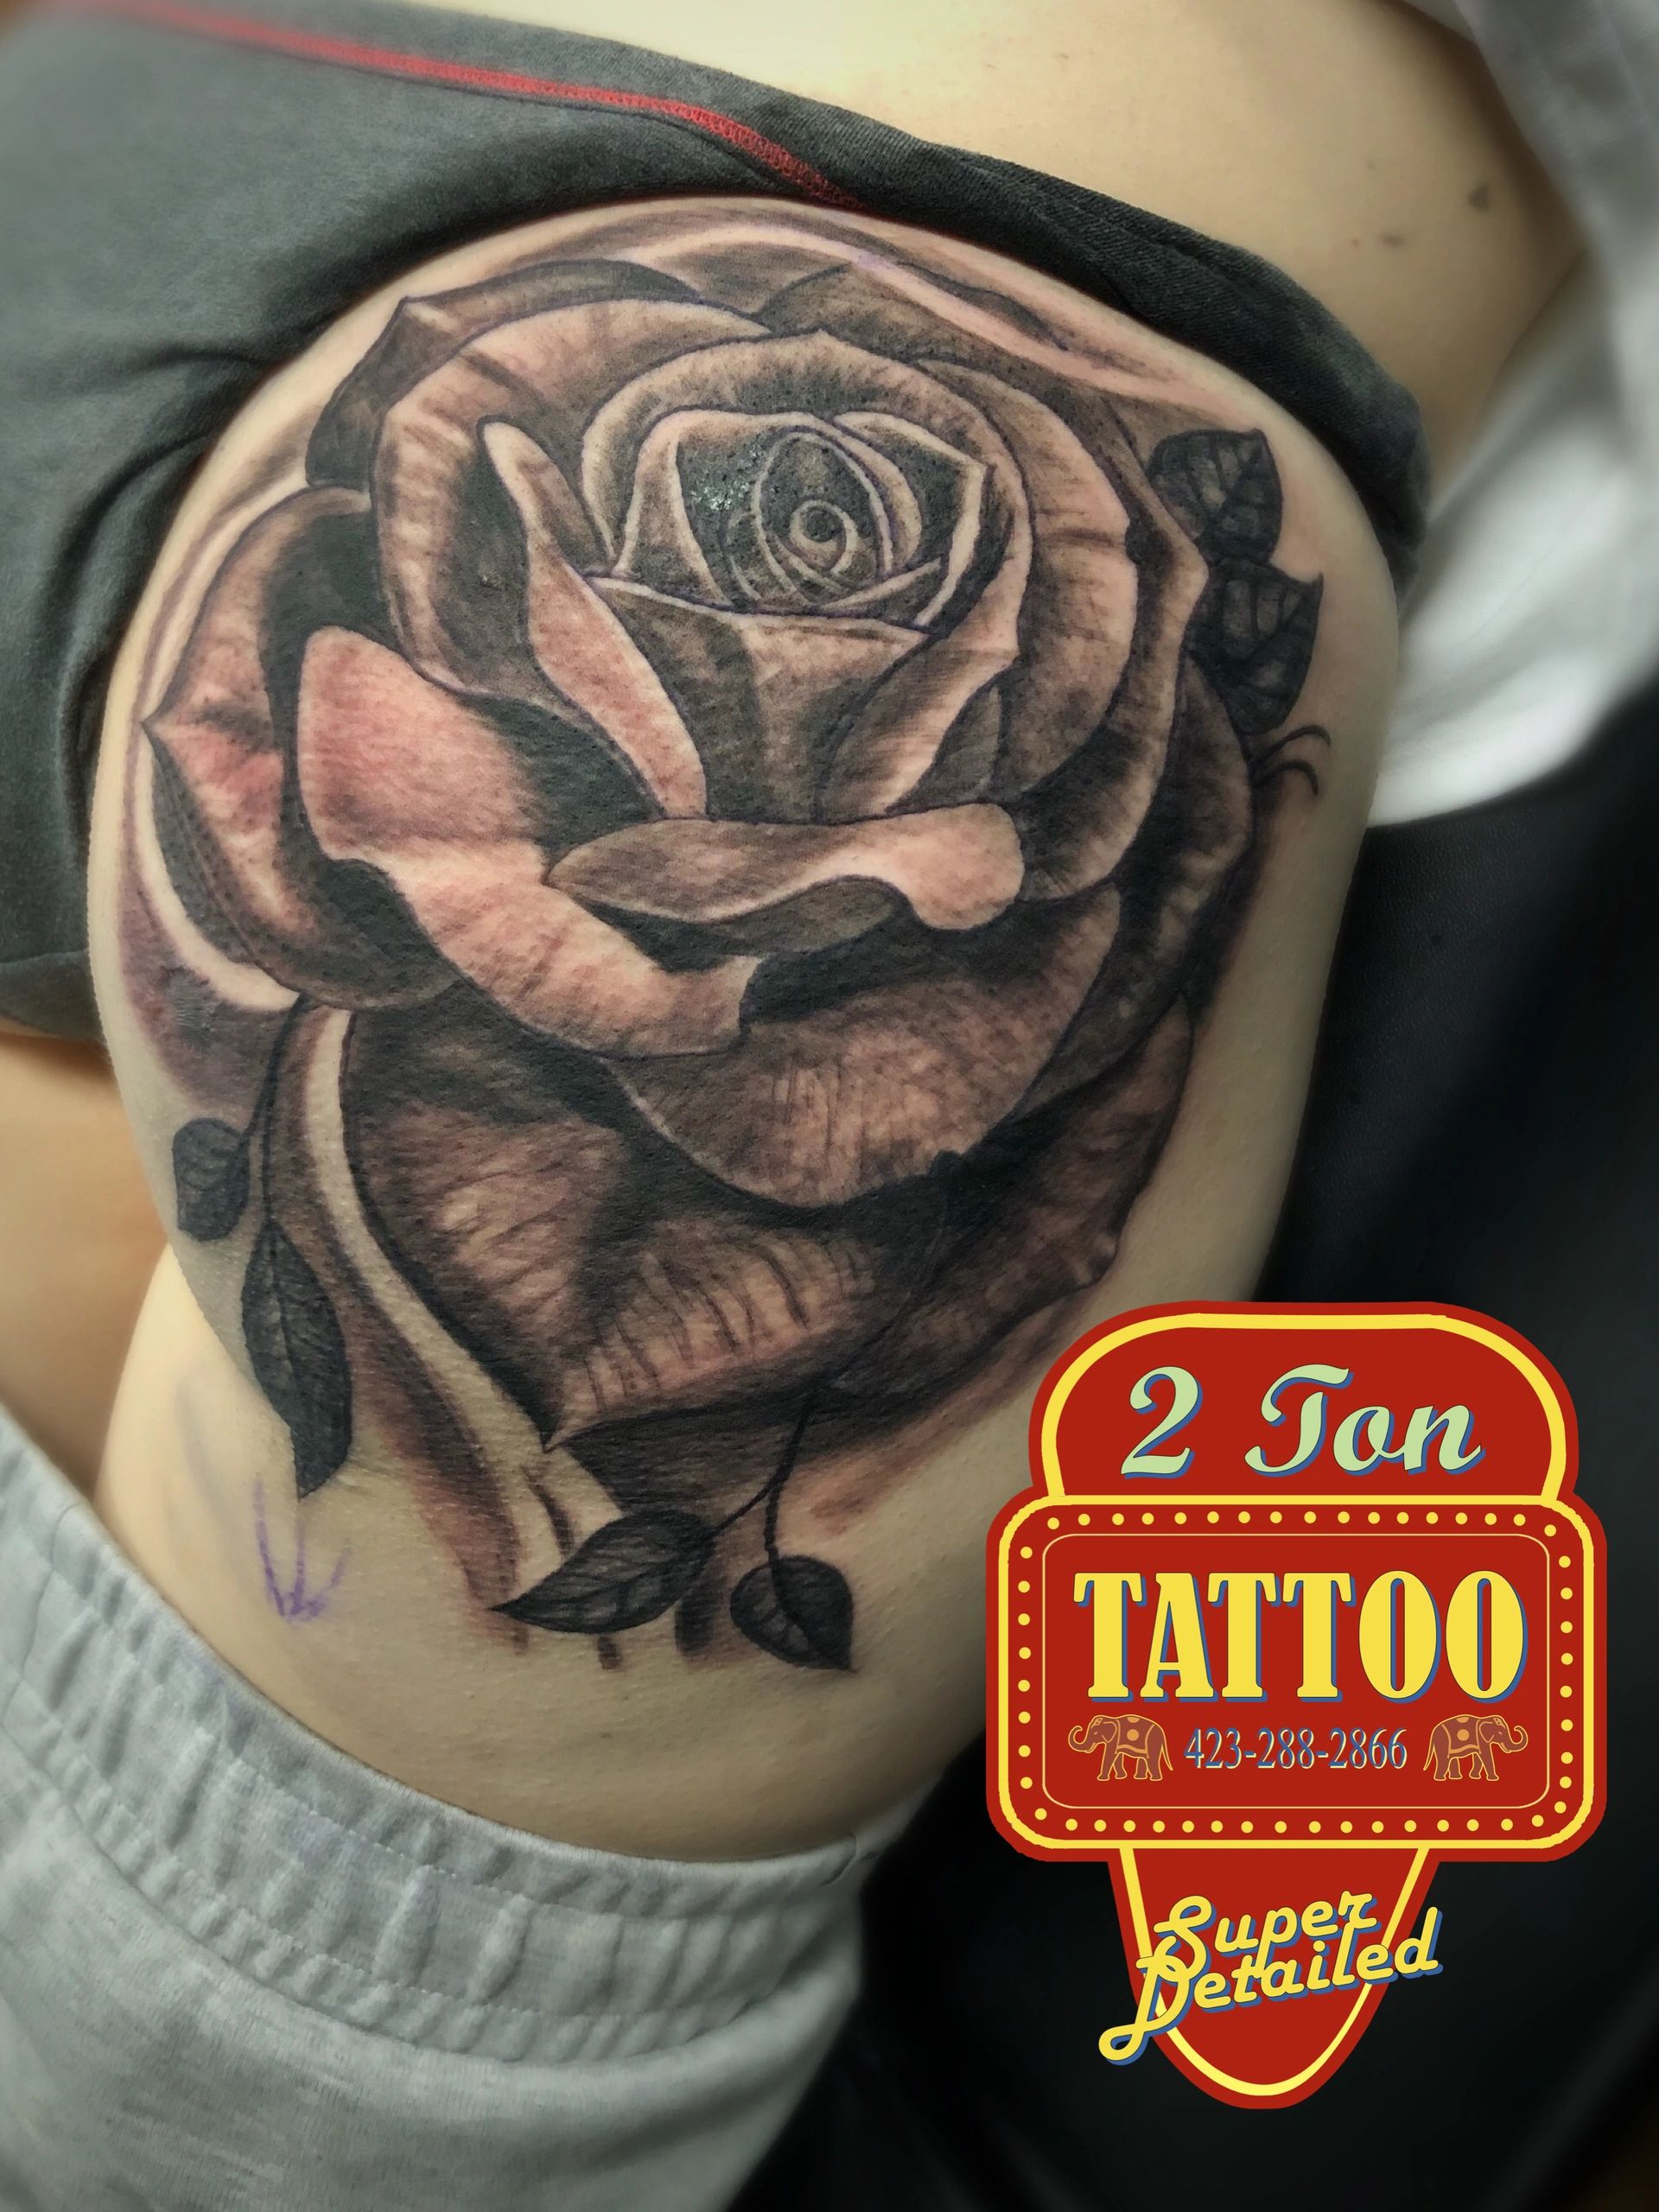 Tattoos and Piercings - 2Ton Tattoo Gallery